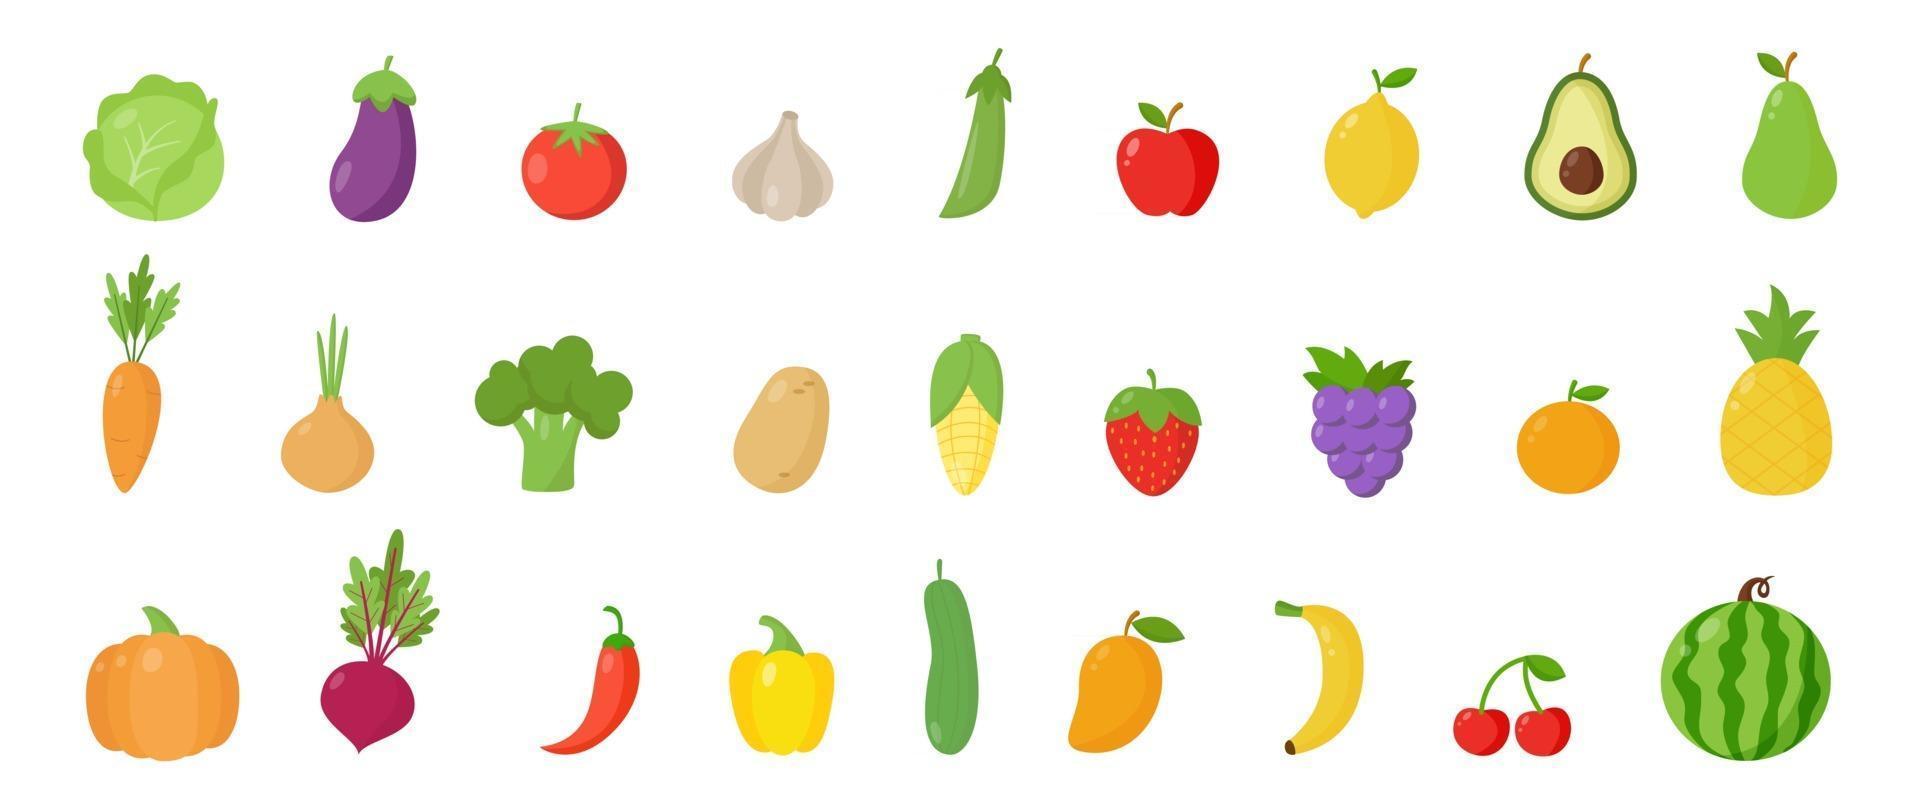 Set of colorful healthy vegetables and fruits Vector illustrations